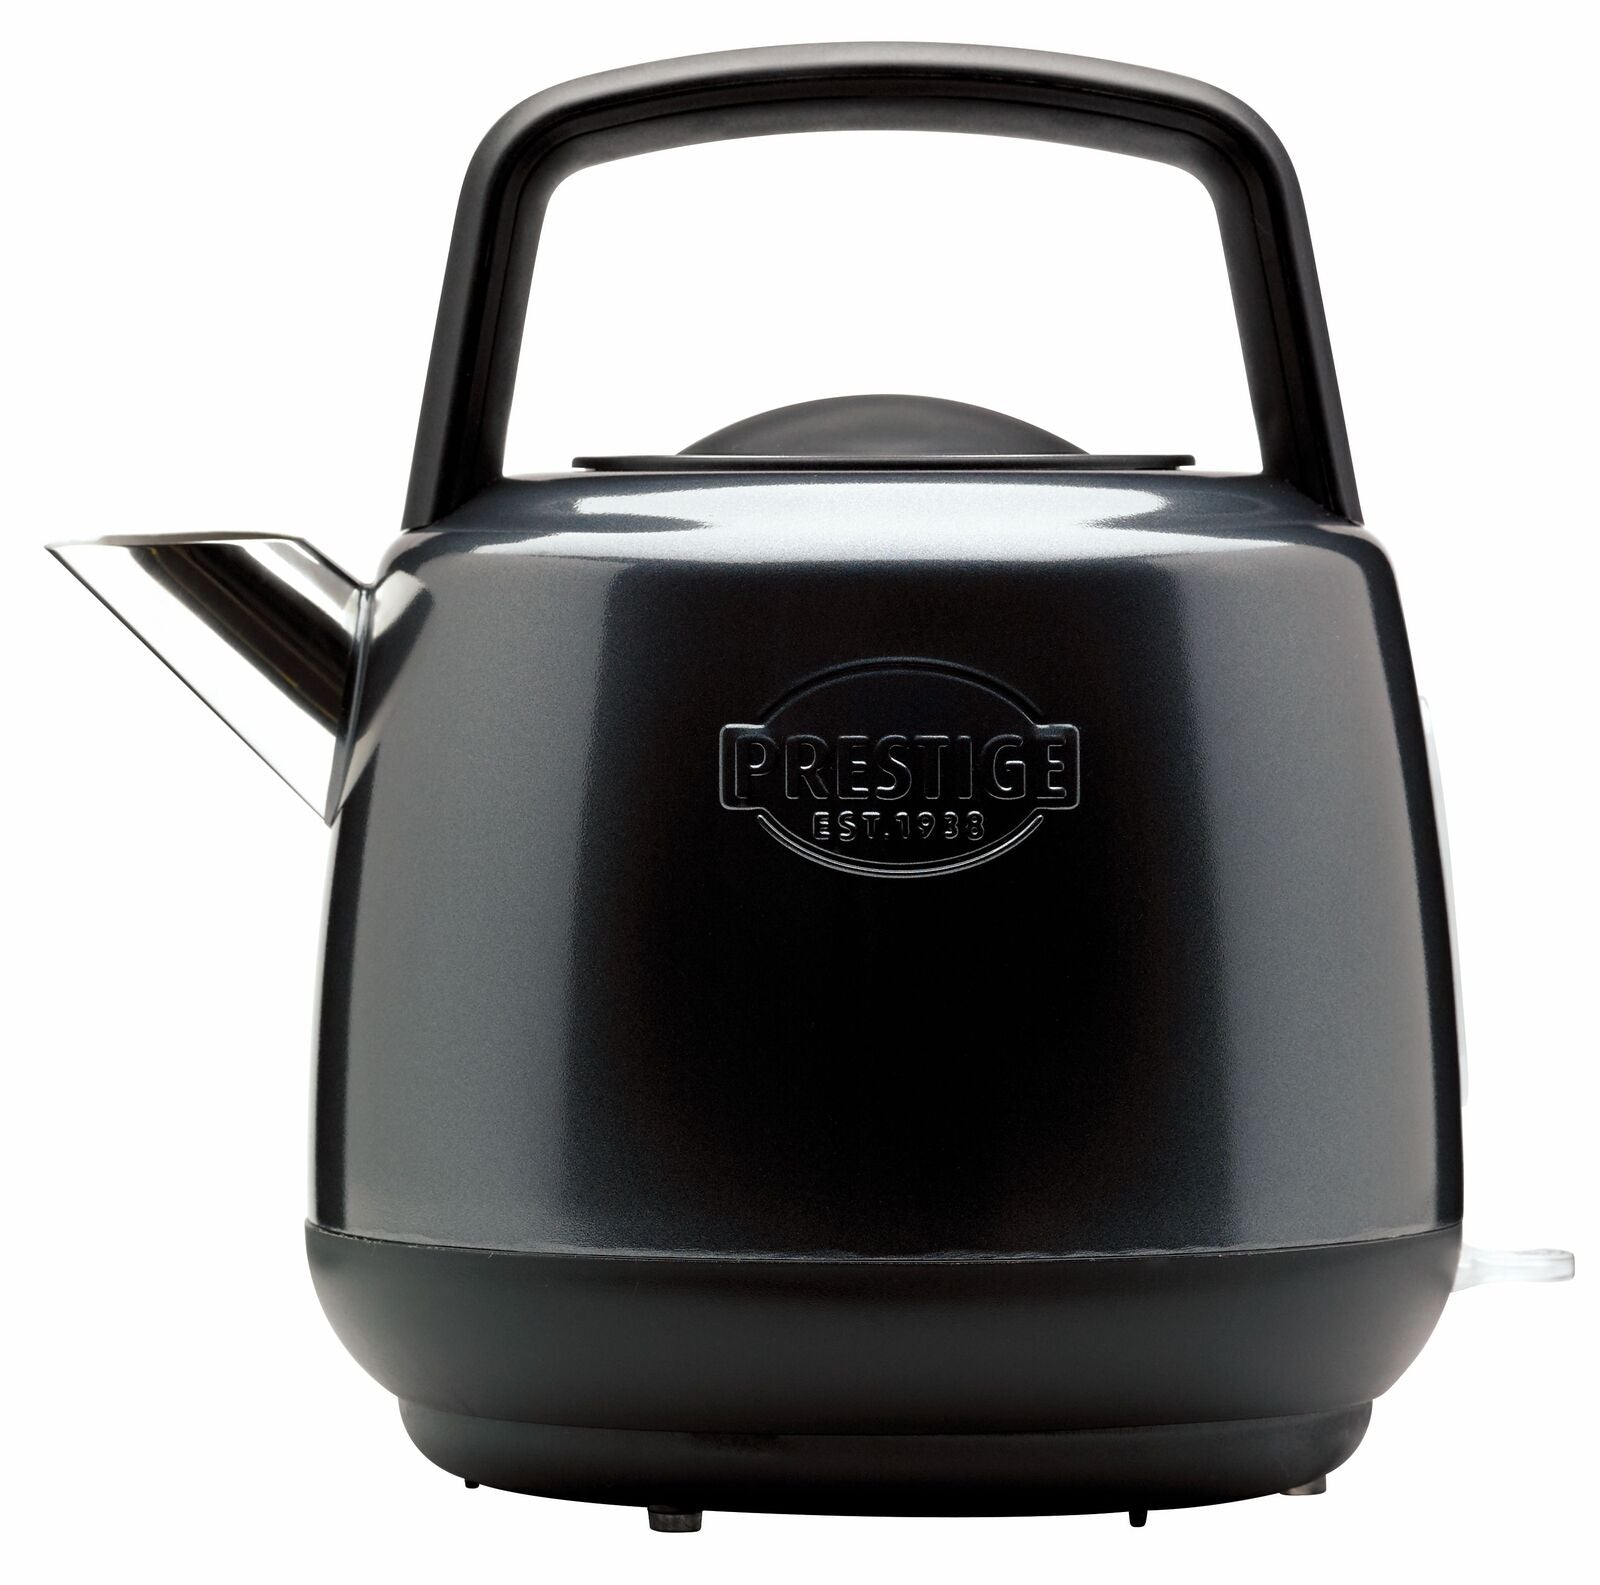 An image of Prestige Electric Kettle and Toaster Sets 2 Piece Set Stainless Steel Black